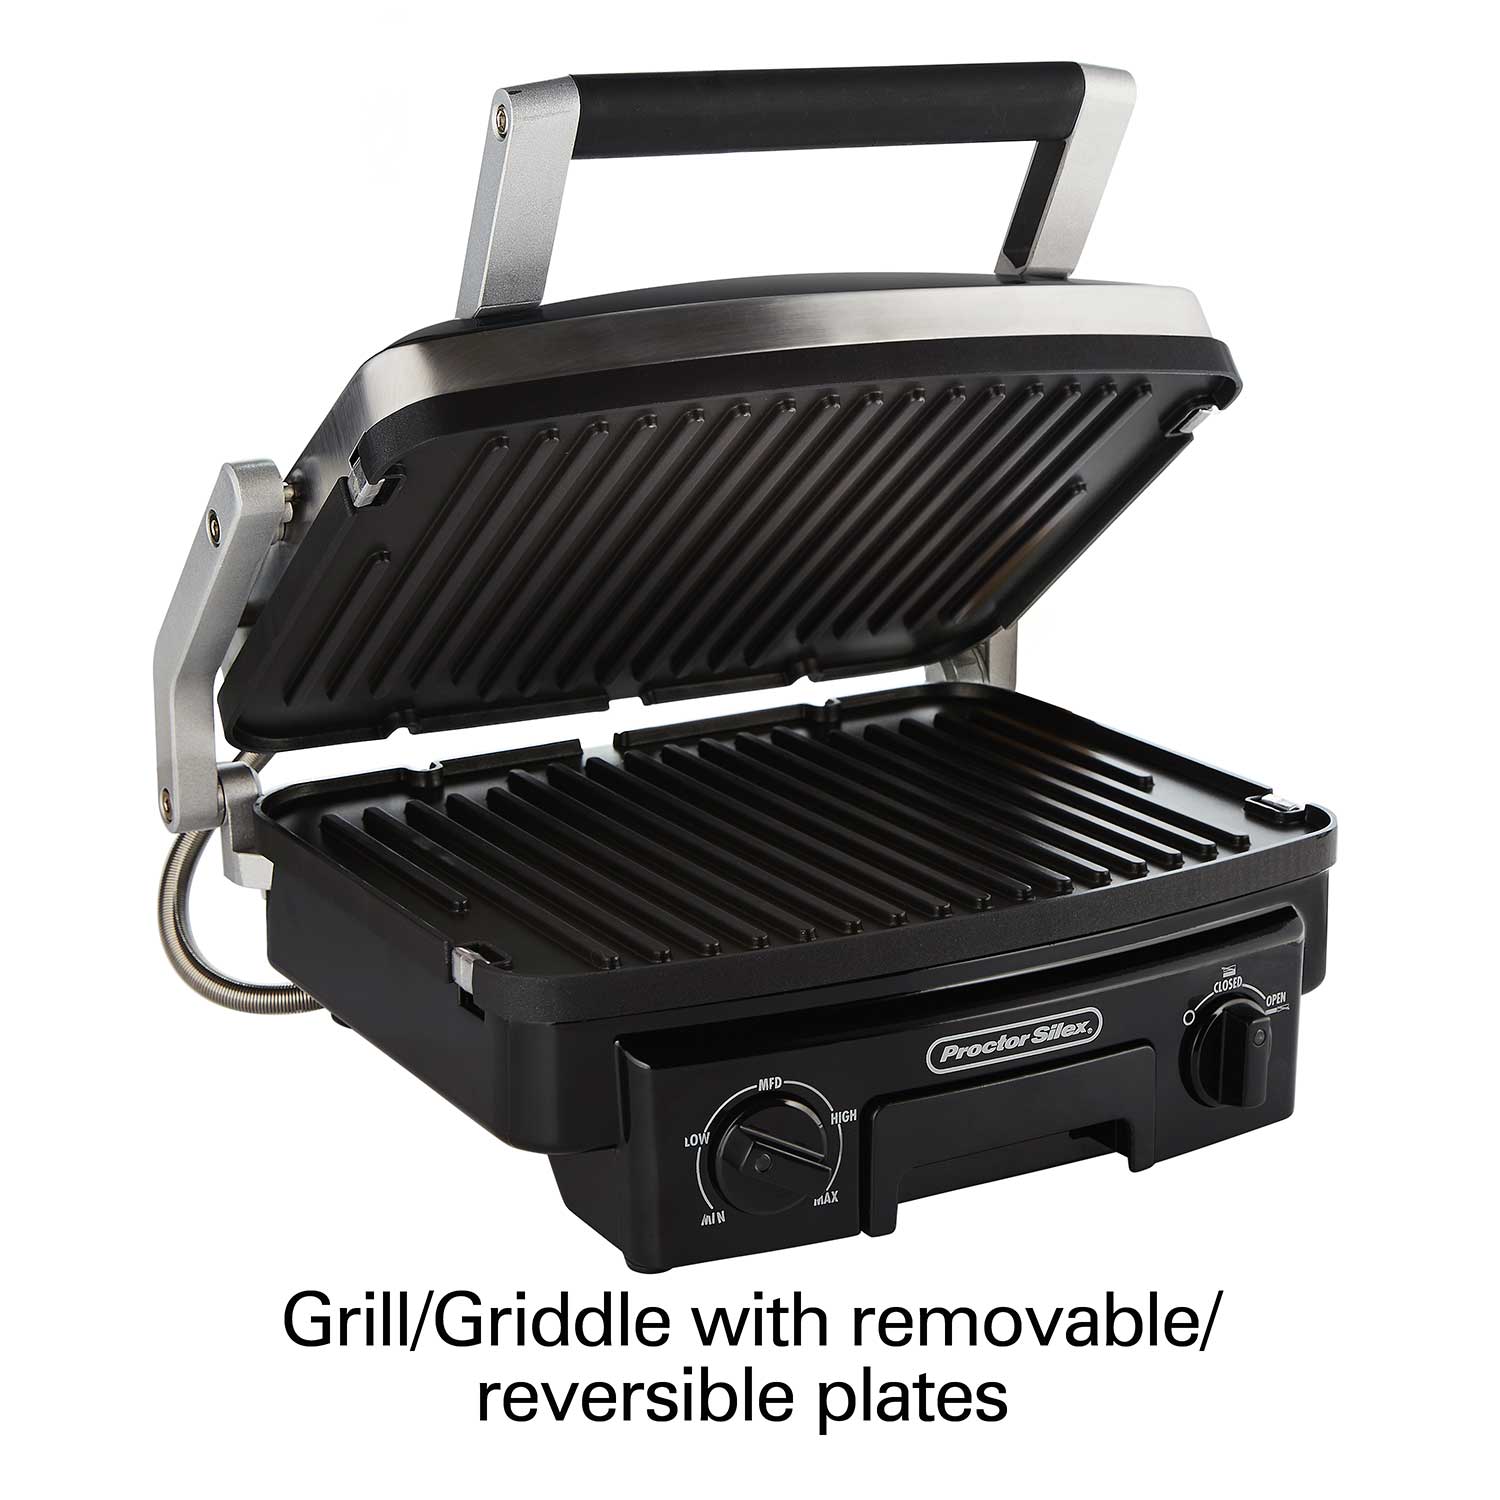 Proctor Silex Electric Grill and Panini Press & Reviews